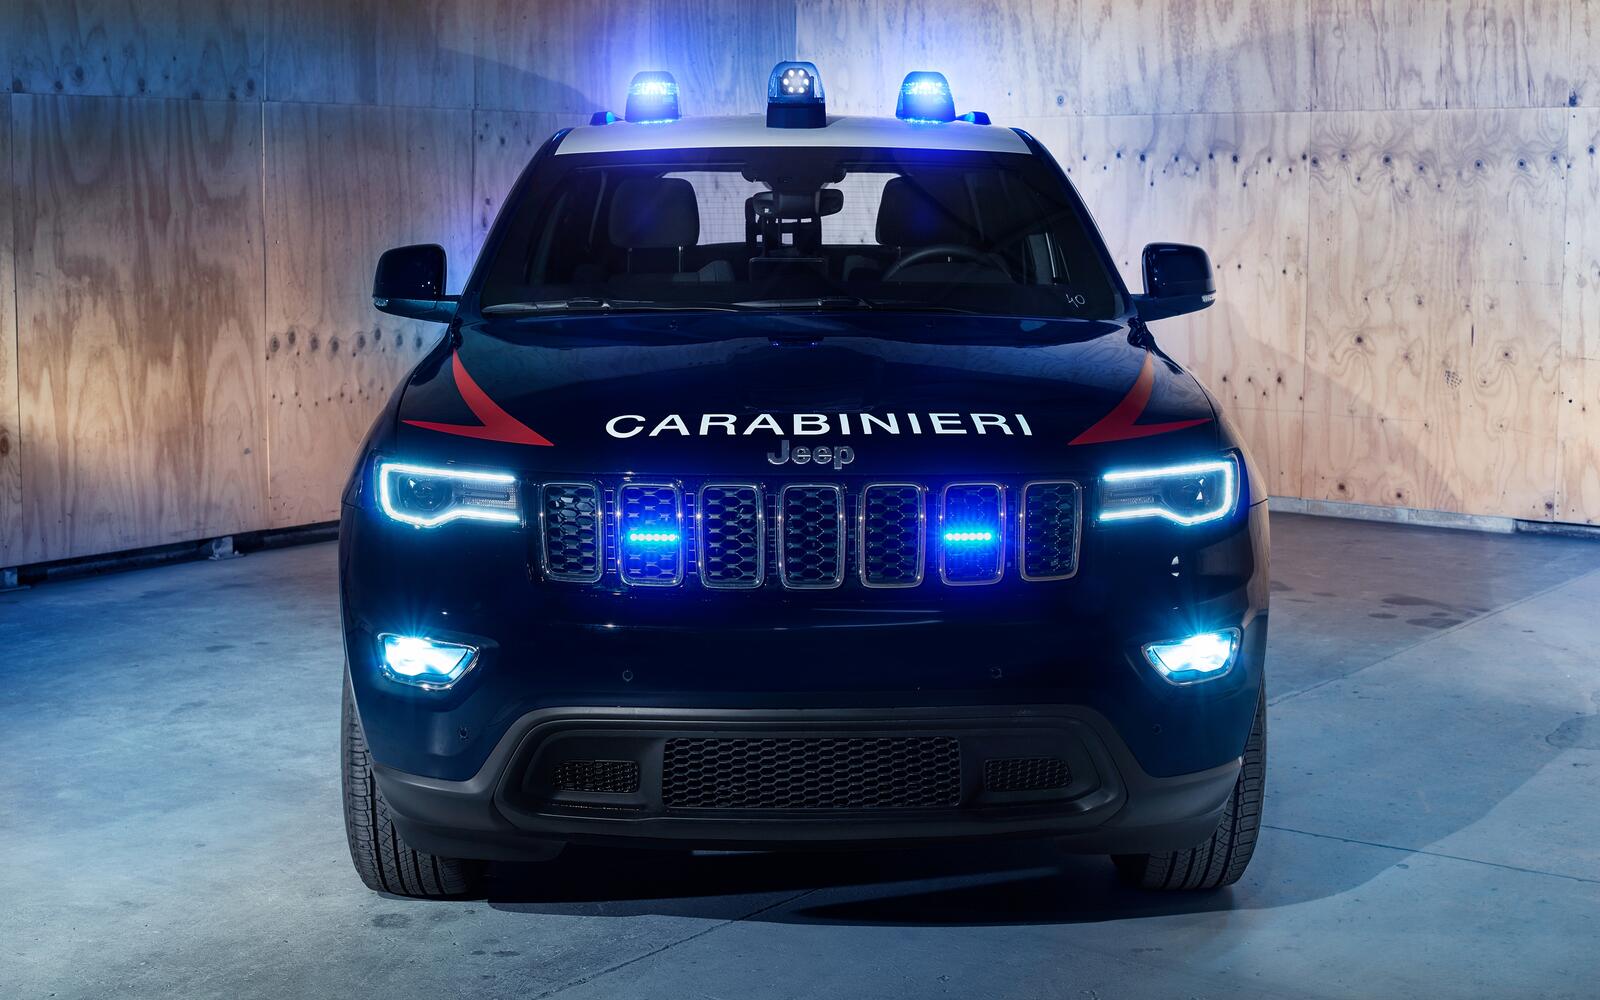 Wallpapers jeep grand cherokee carabinieri view from front police cars on the desktop